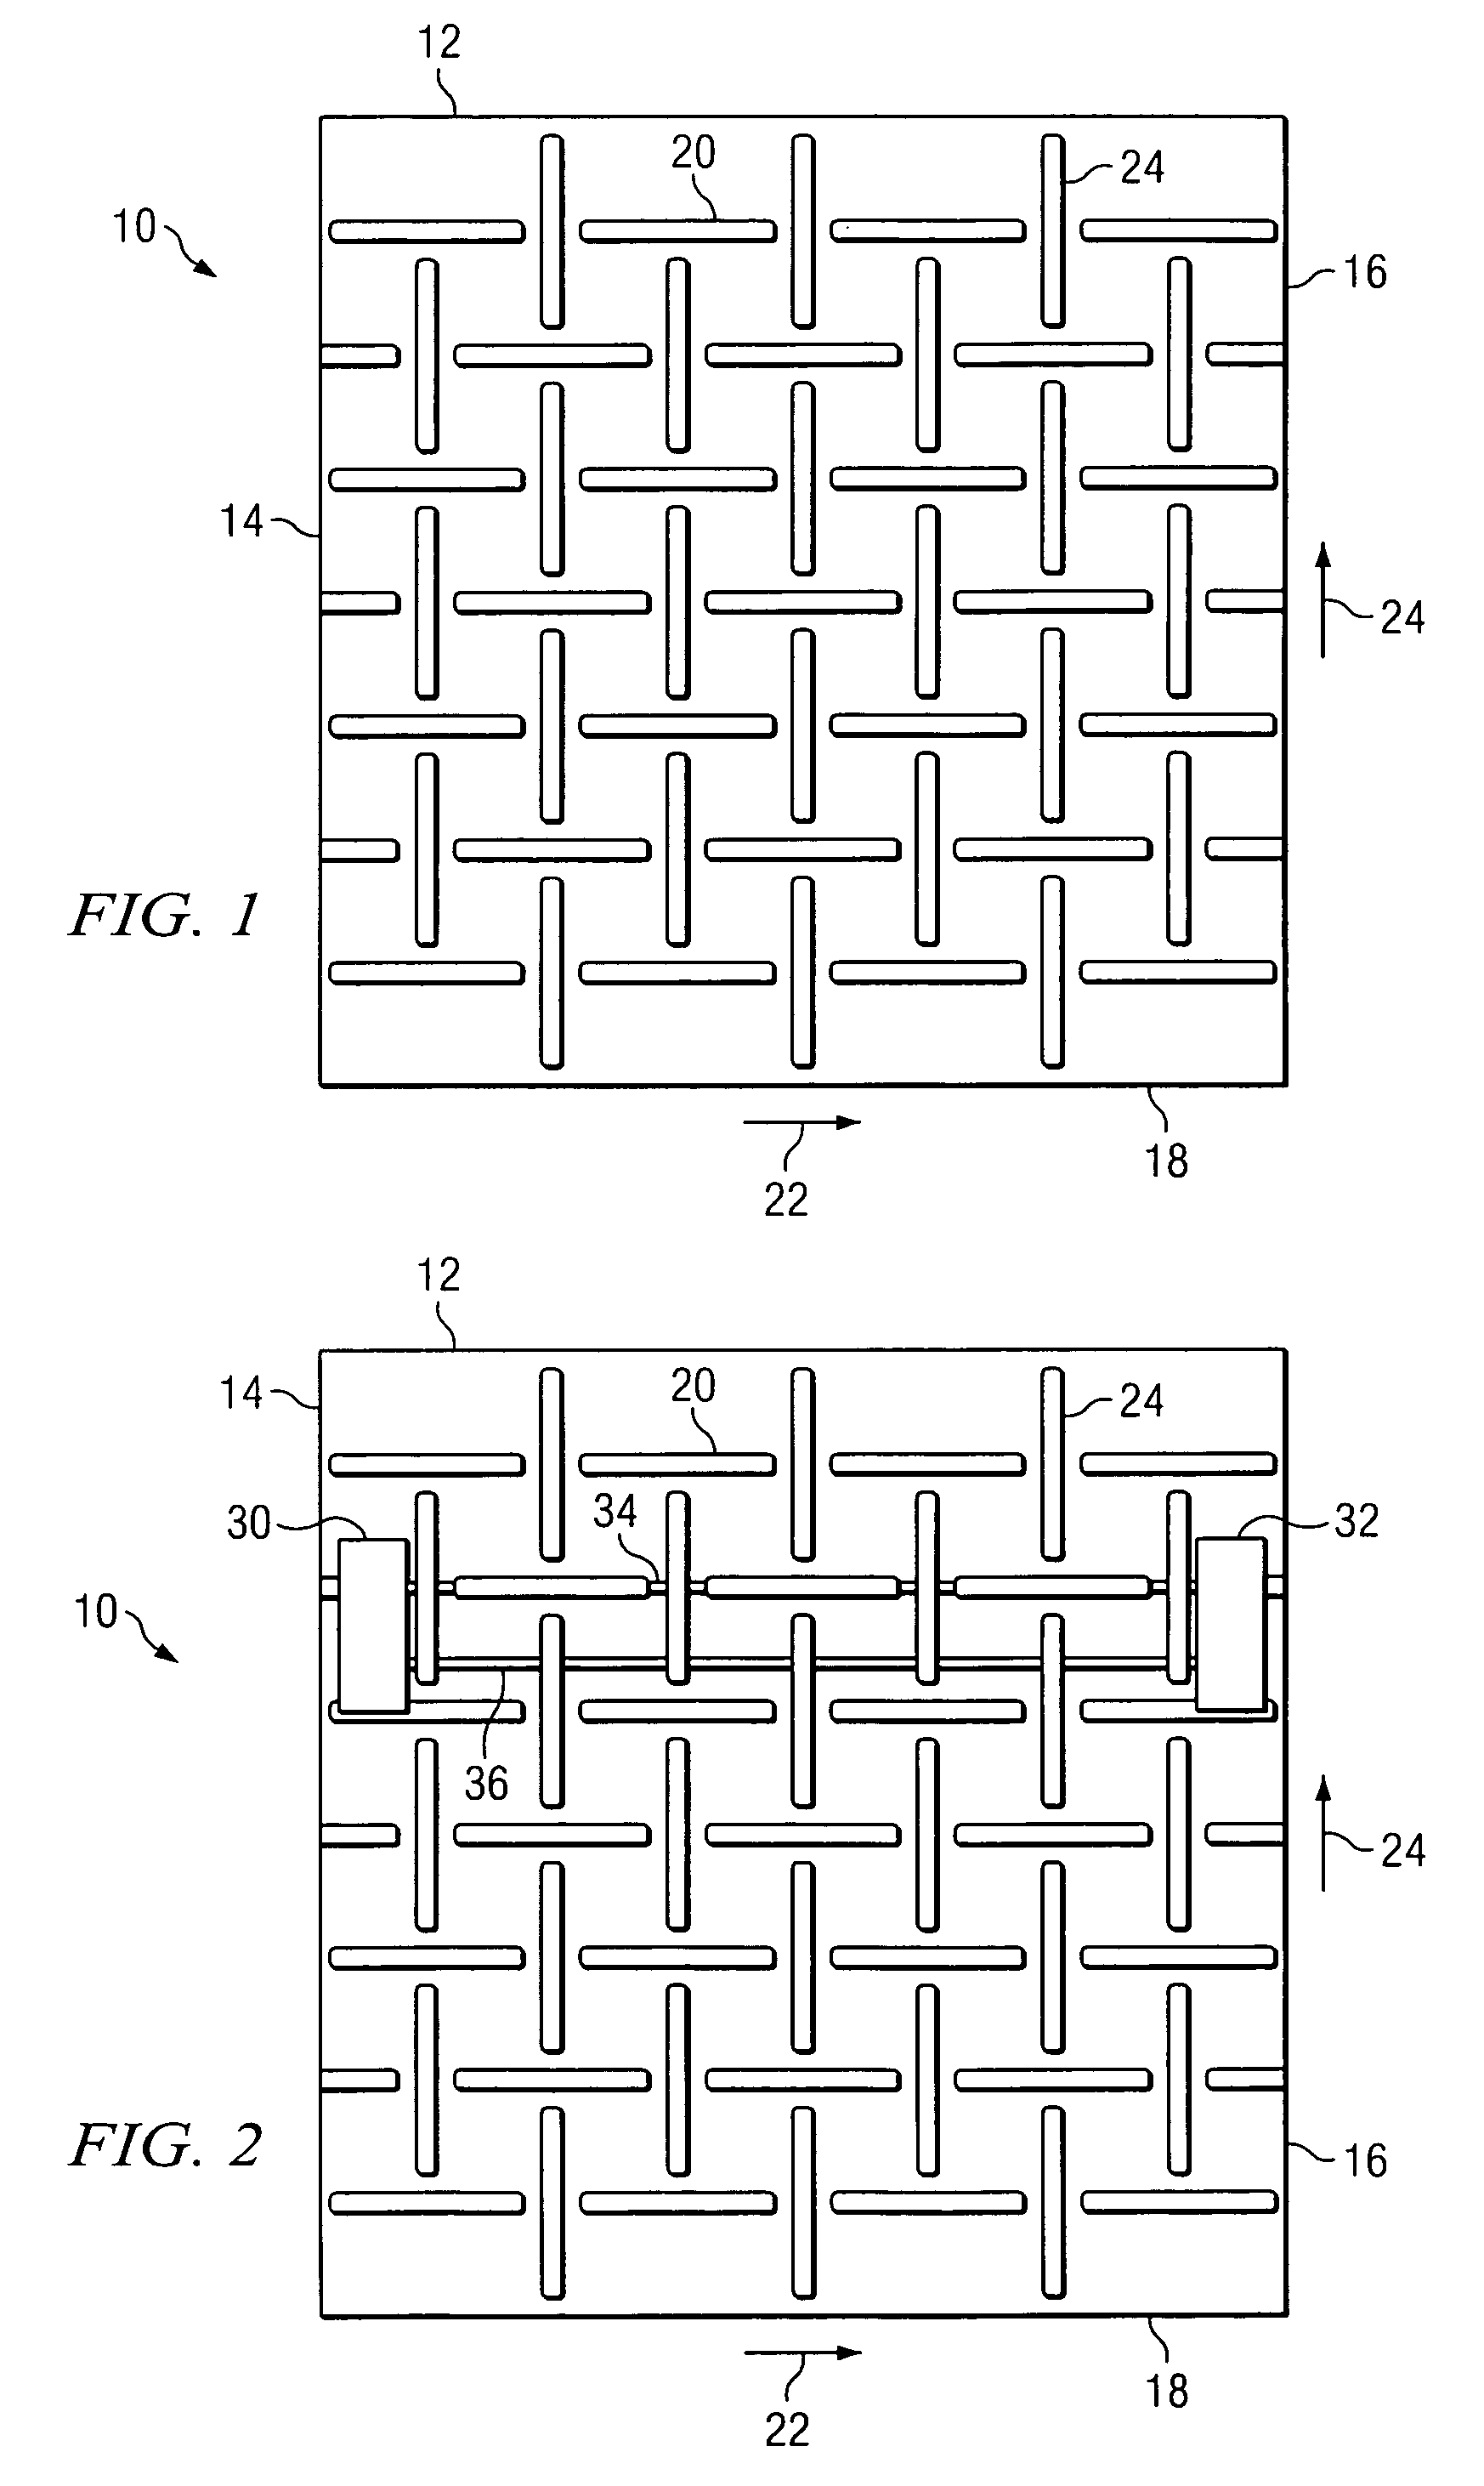 System and method for optimizing printed circuit boards to minimize effects of non-uniform dielectric